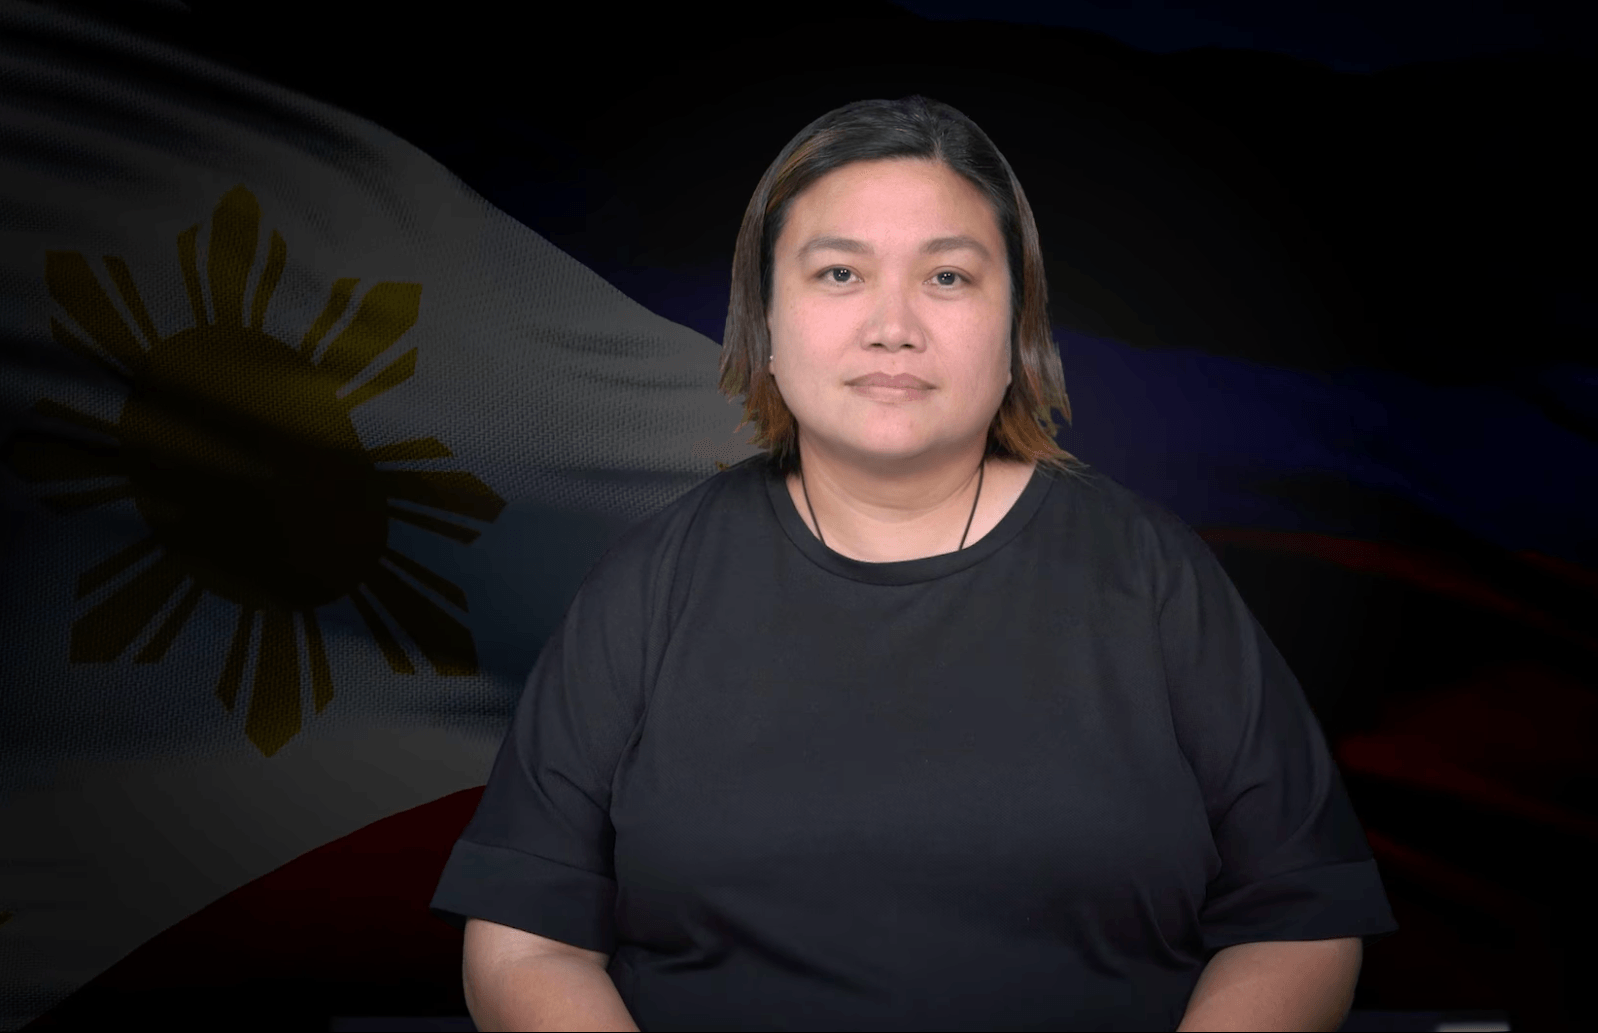 Tuguegarao City elects Maila Ting as first woman mayor